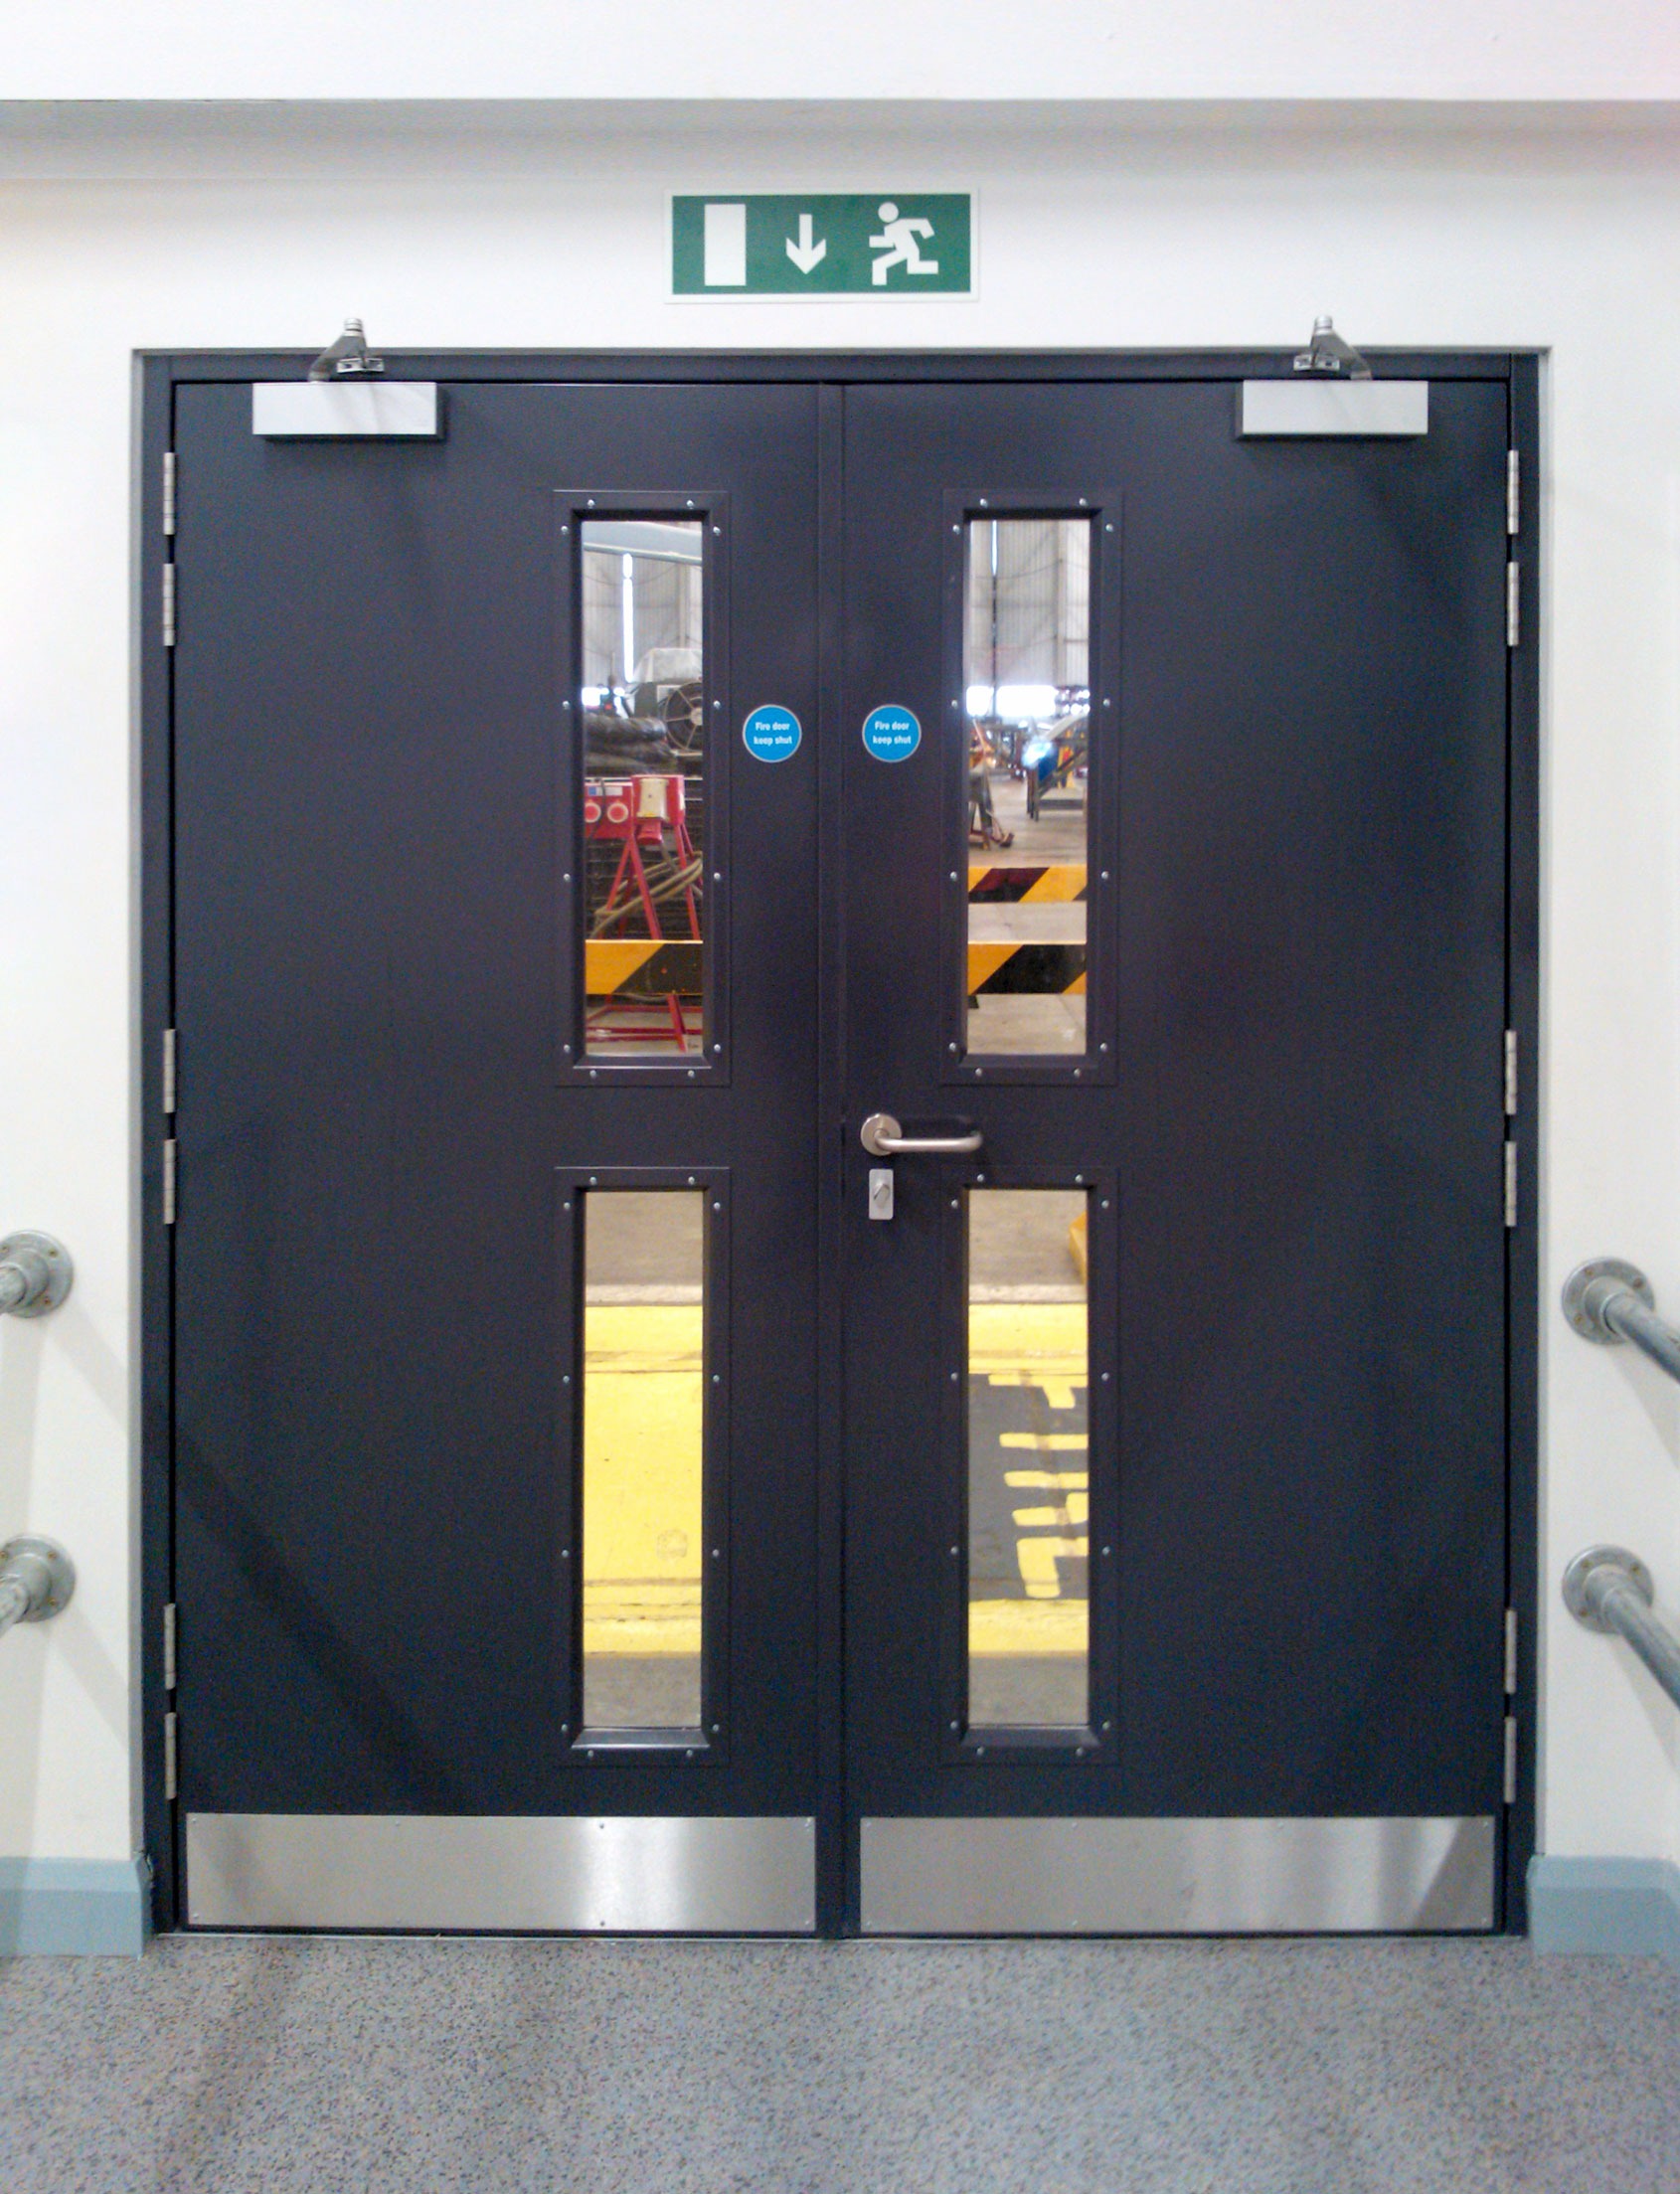 A set of fire doors with a fire exit sign above.